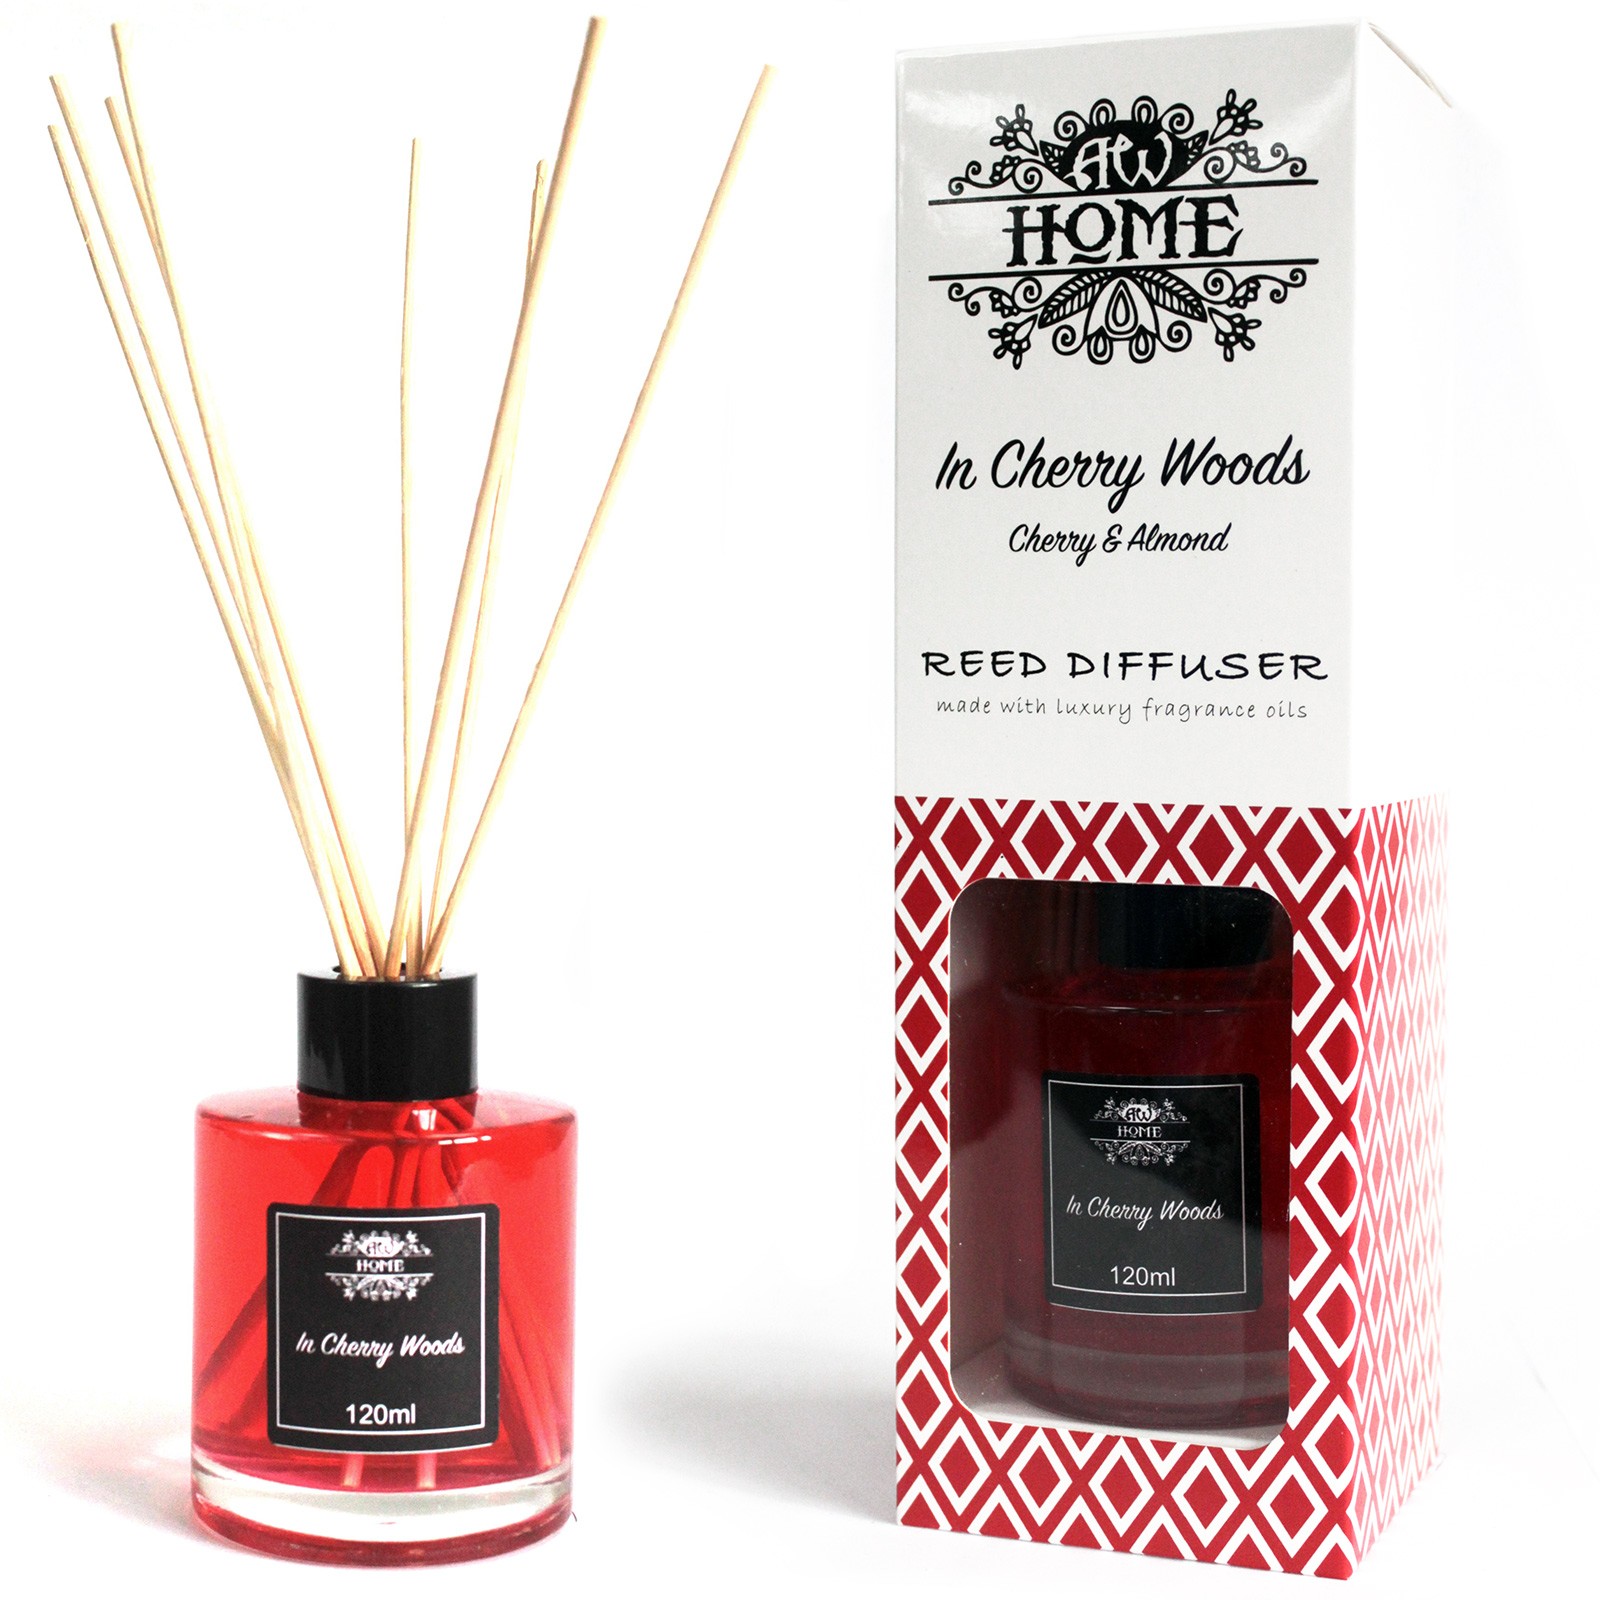 Cherry Woods - 120ml Reed Diffuser